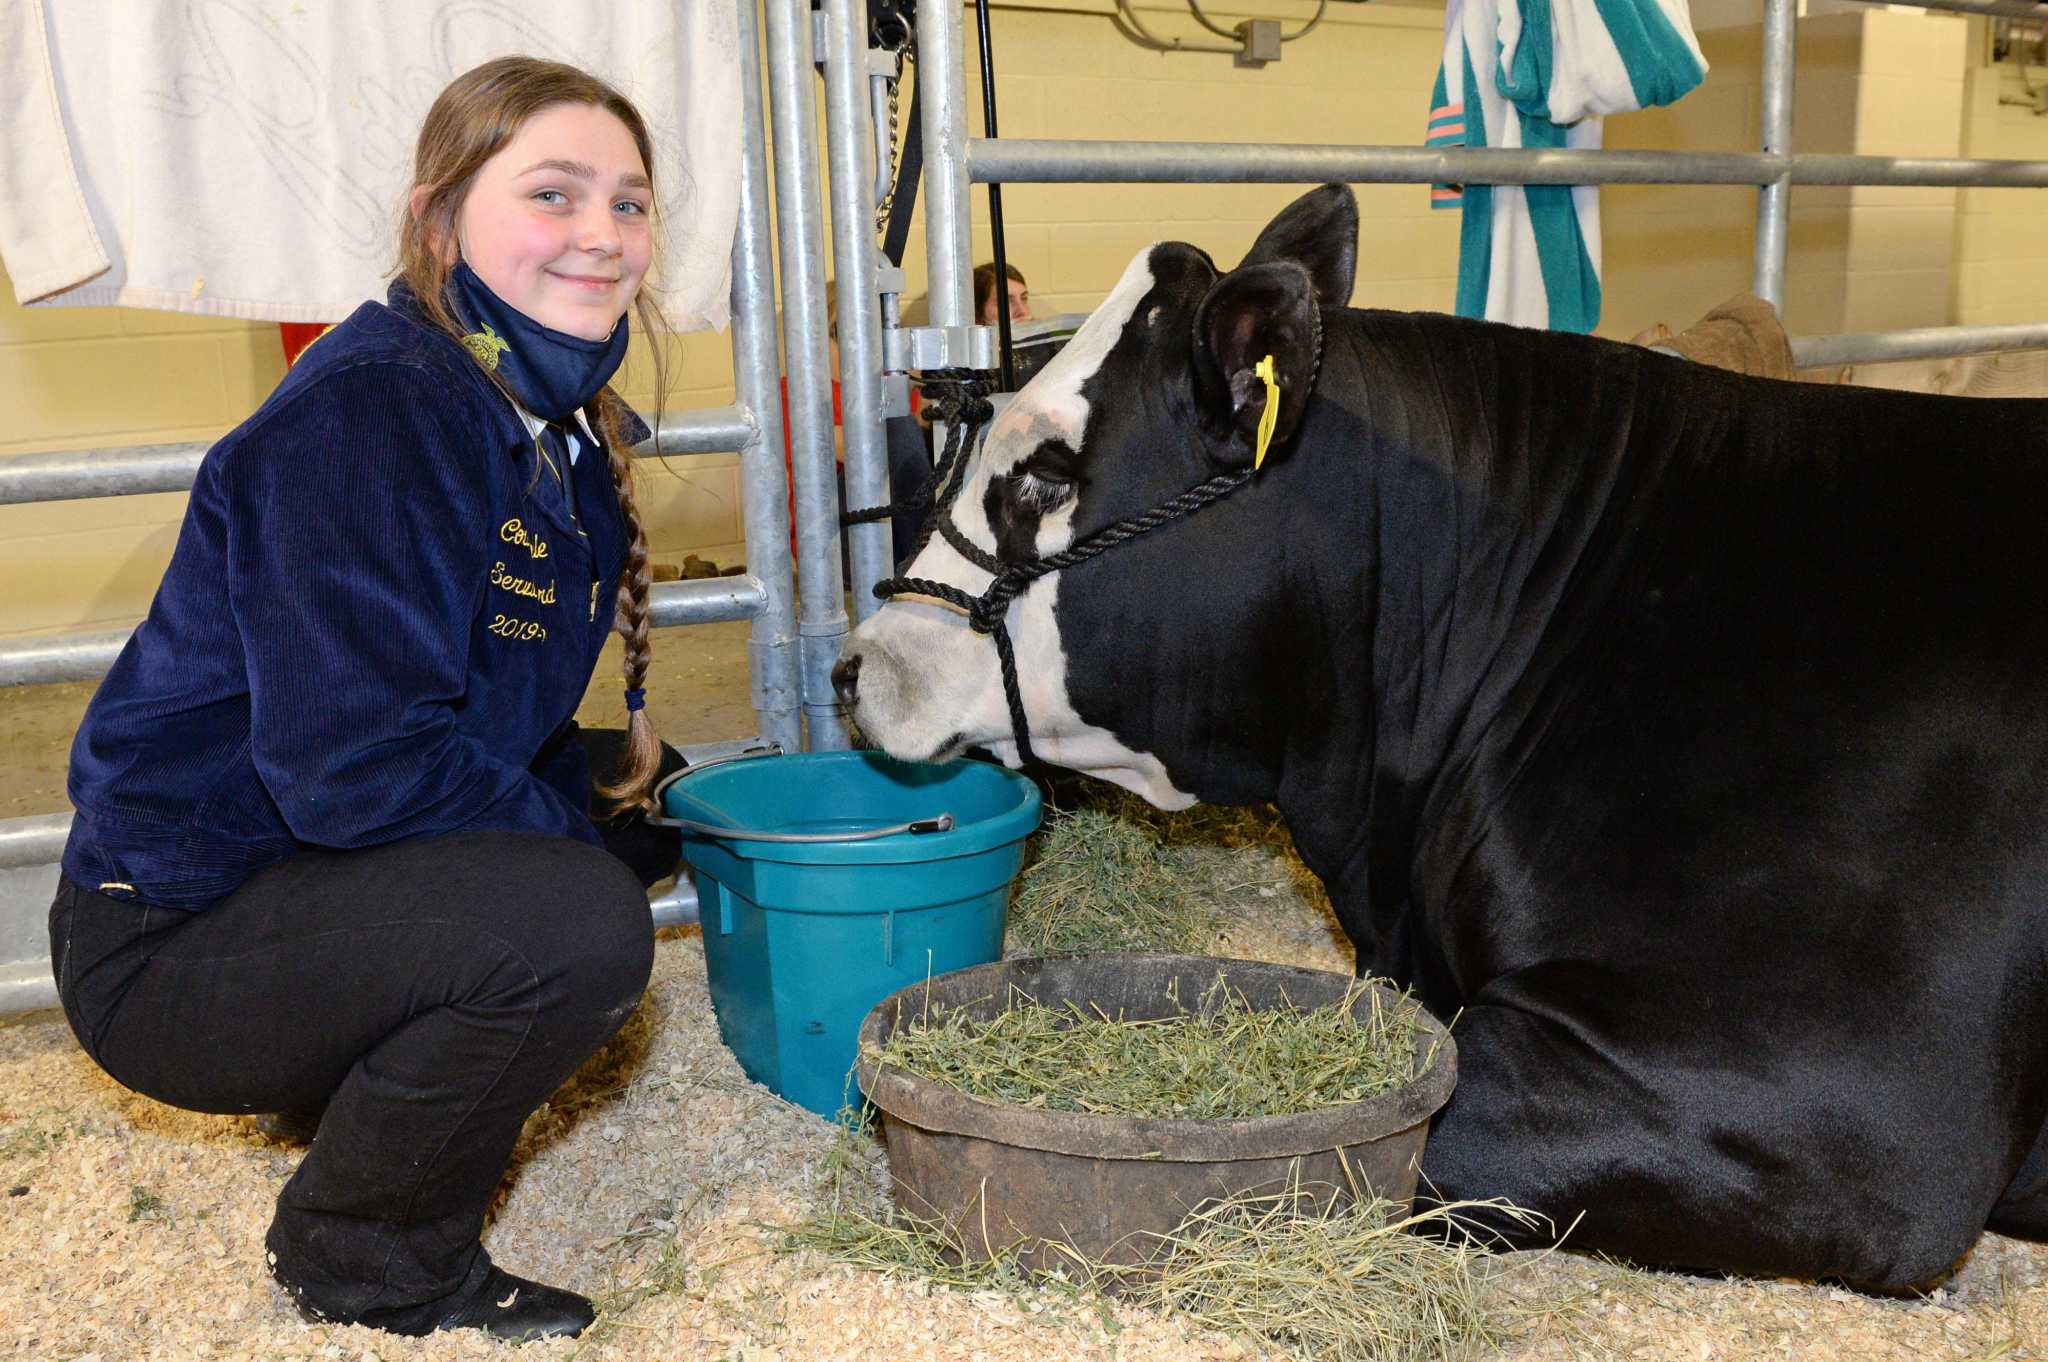 Students’ efforts apparent at the Katy ISD FFA Livestock Show